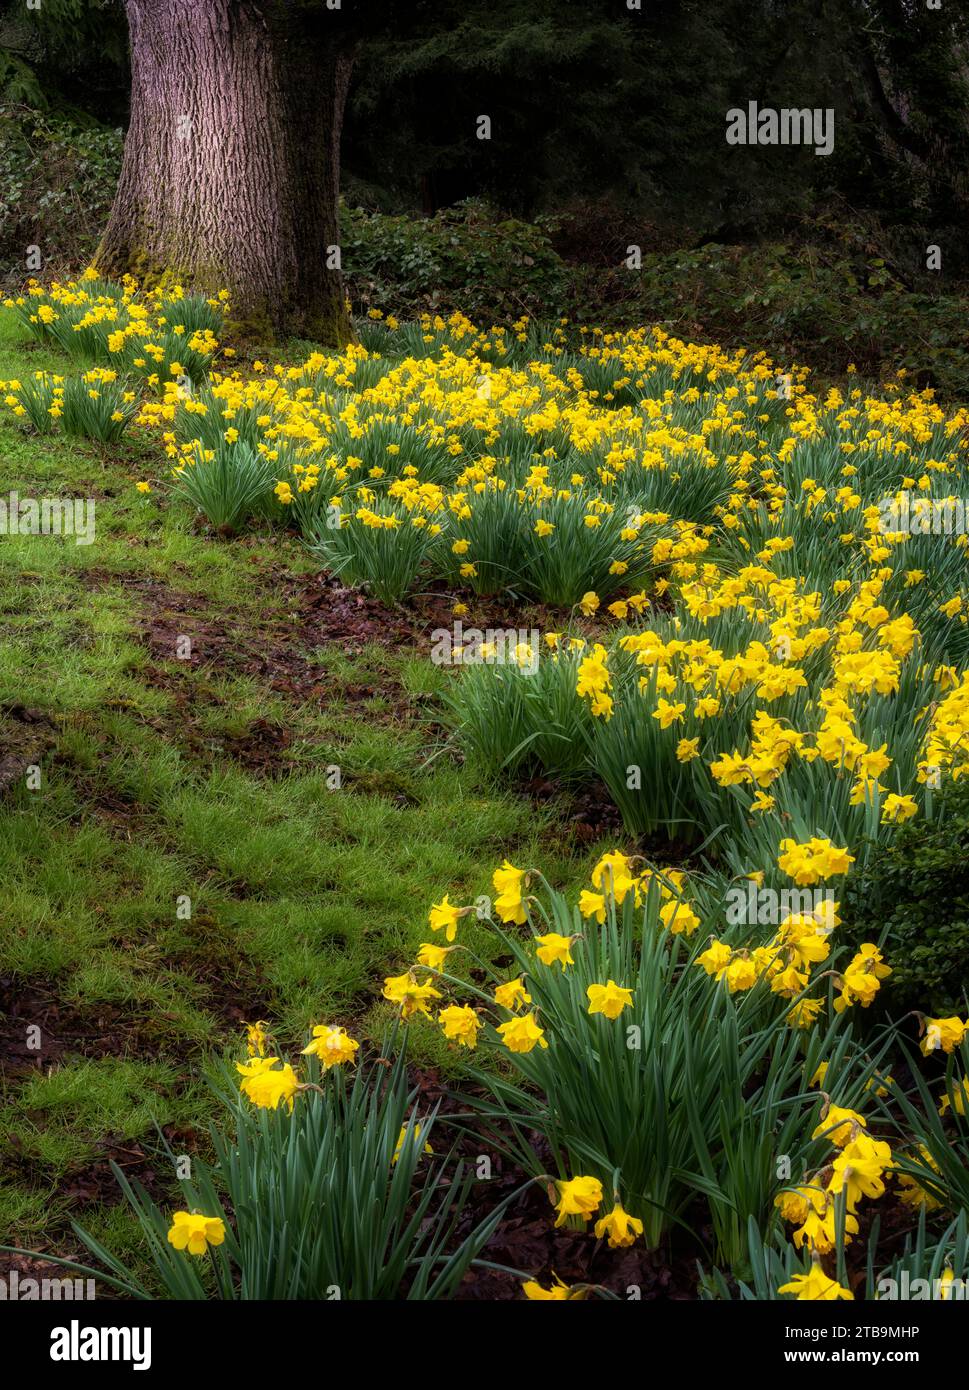 Dafodils and fog with large oak tree. Wilsonville, Oregon Stock Photo